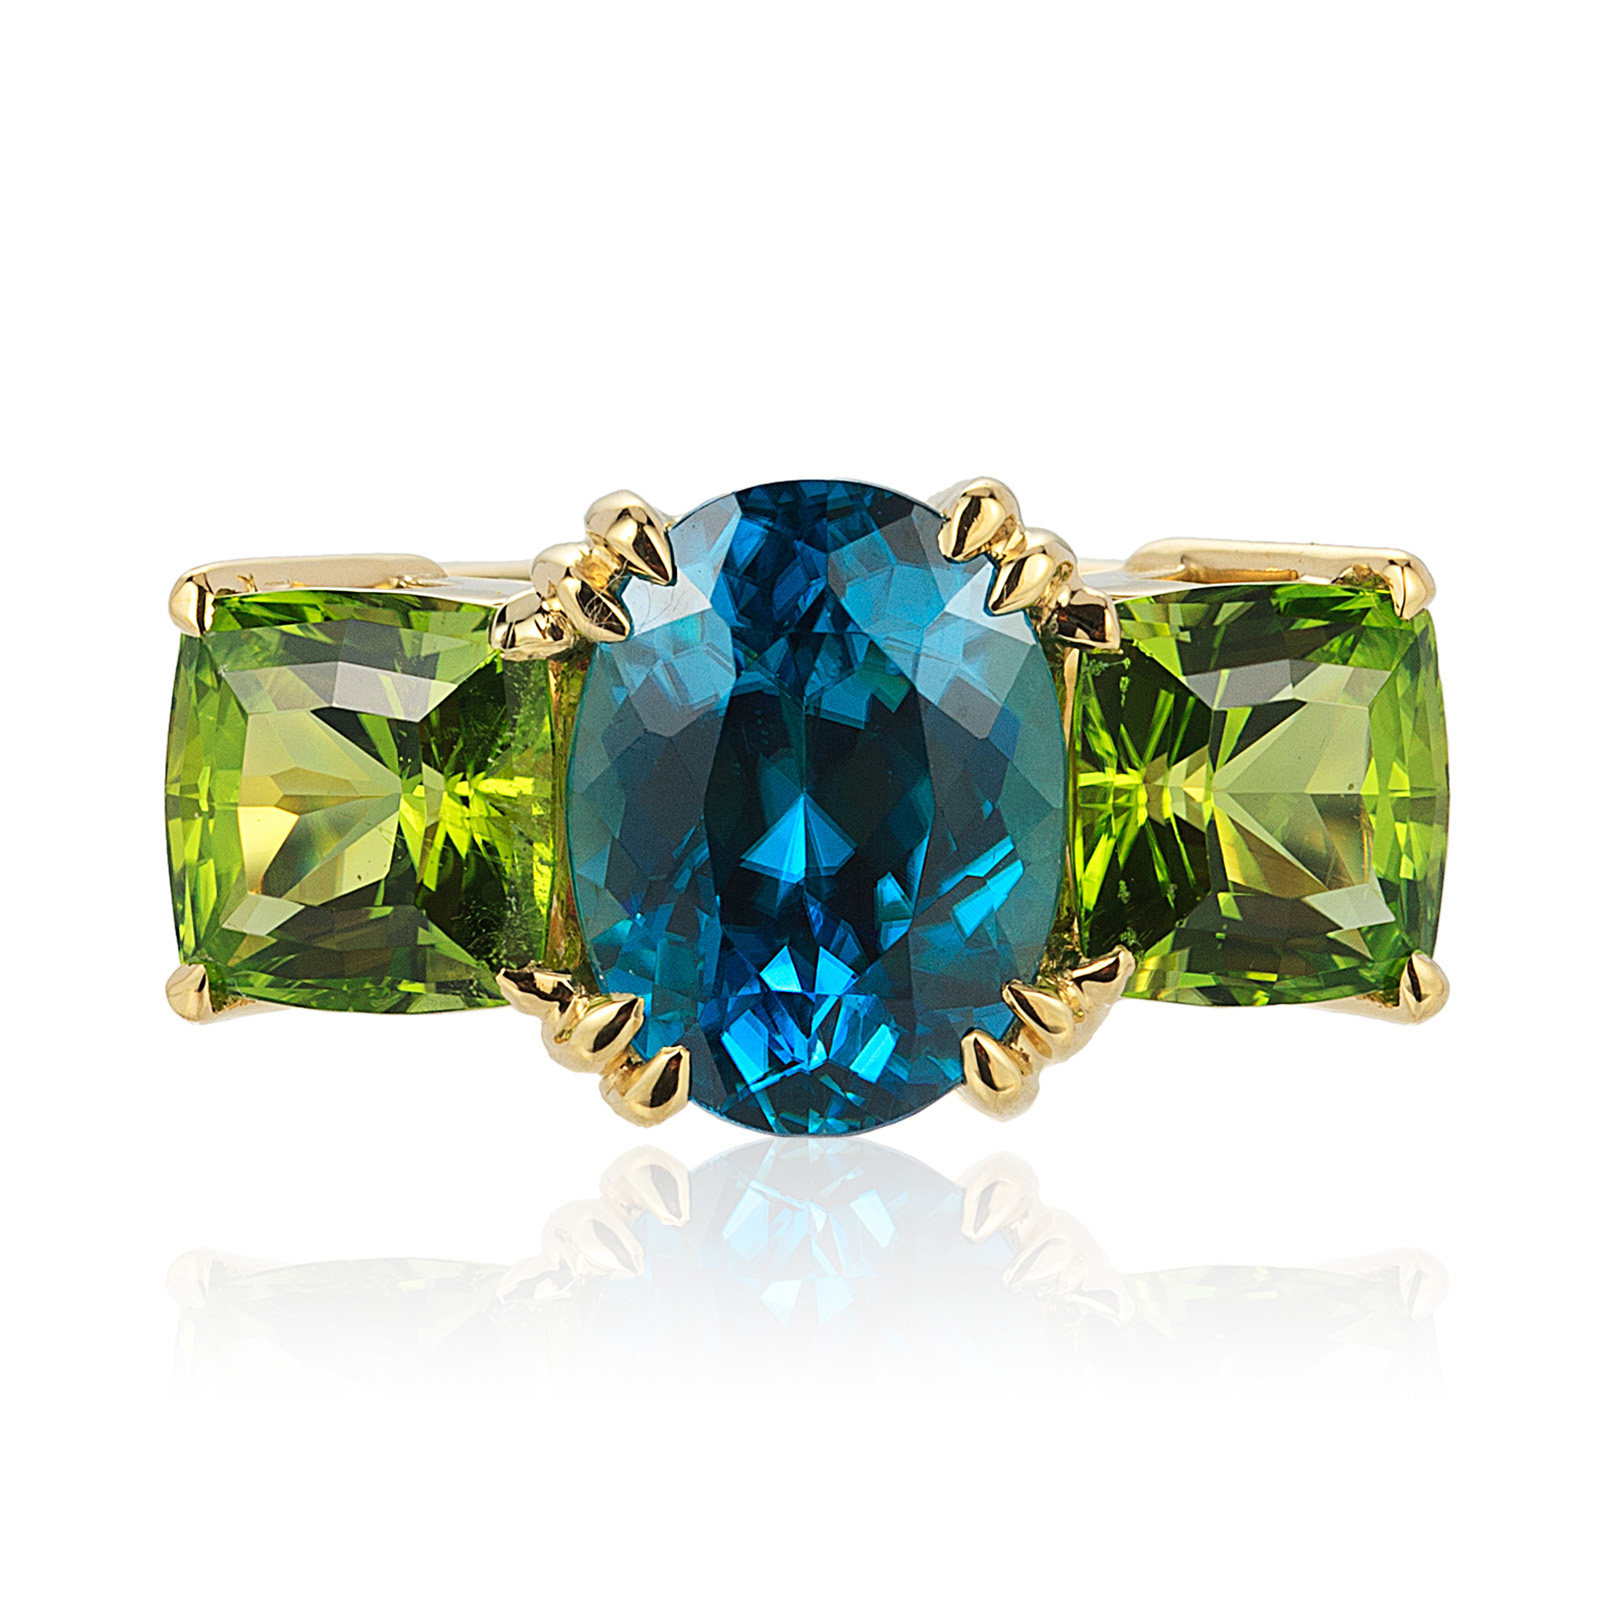 “Heaven & Earth” three-stone ring in 18 karat yellow gold featuring a 5.49 carats vivid Blue Zircon combined with a 4.22 carats pair of Peridot.